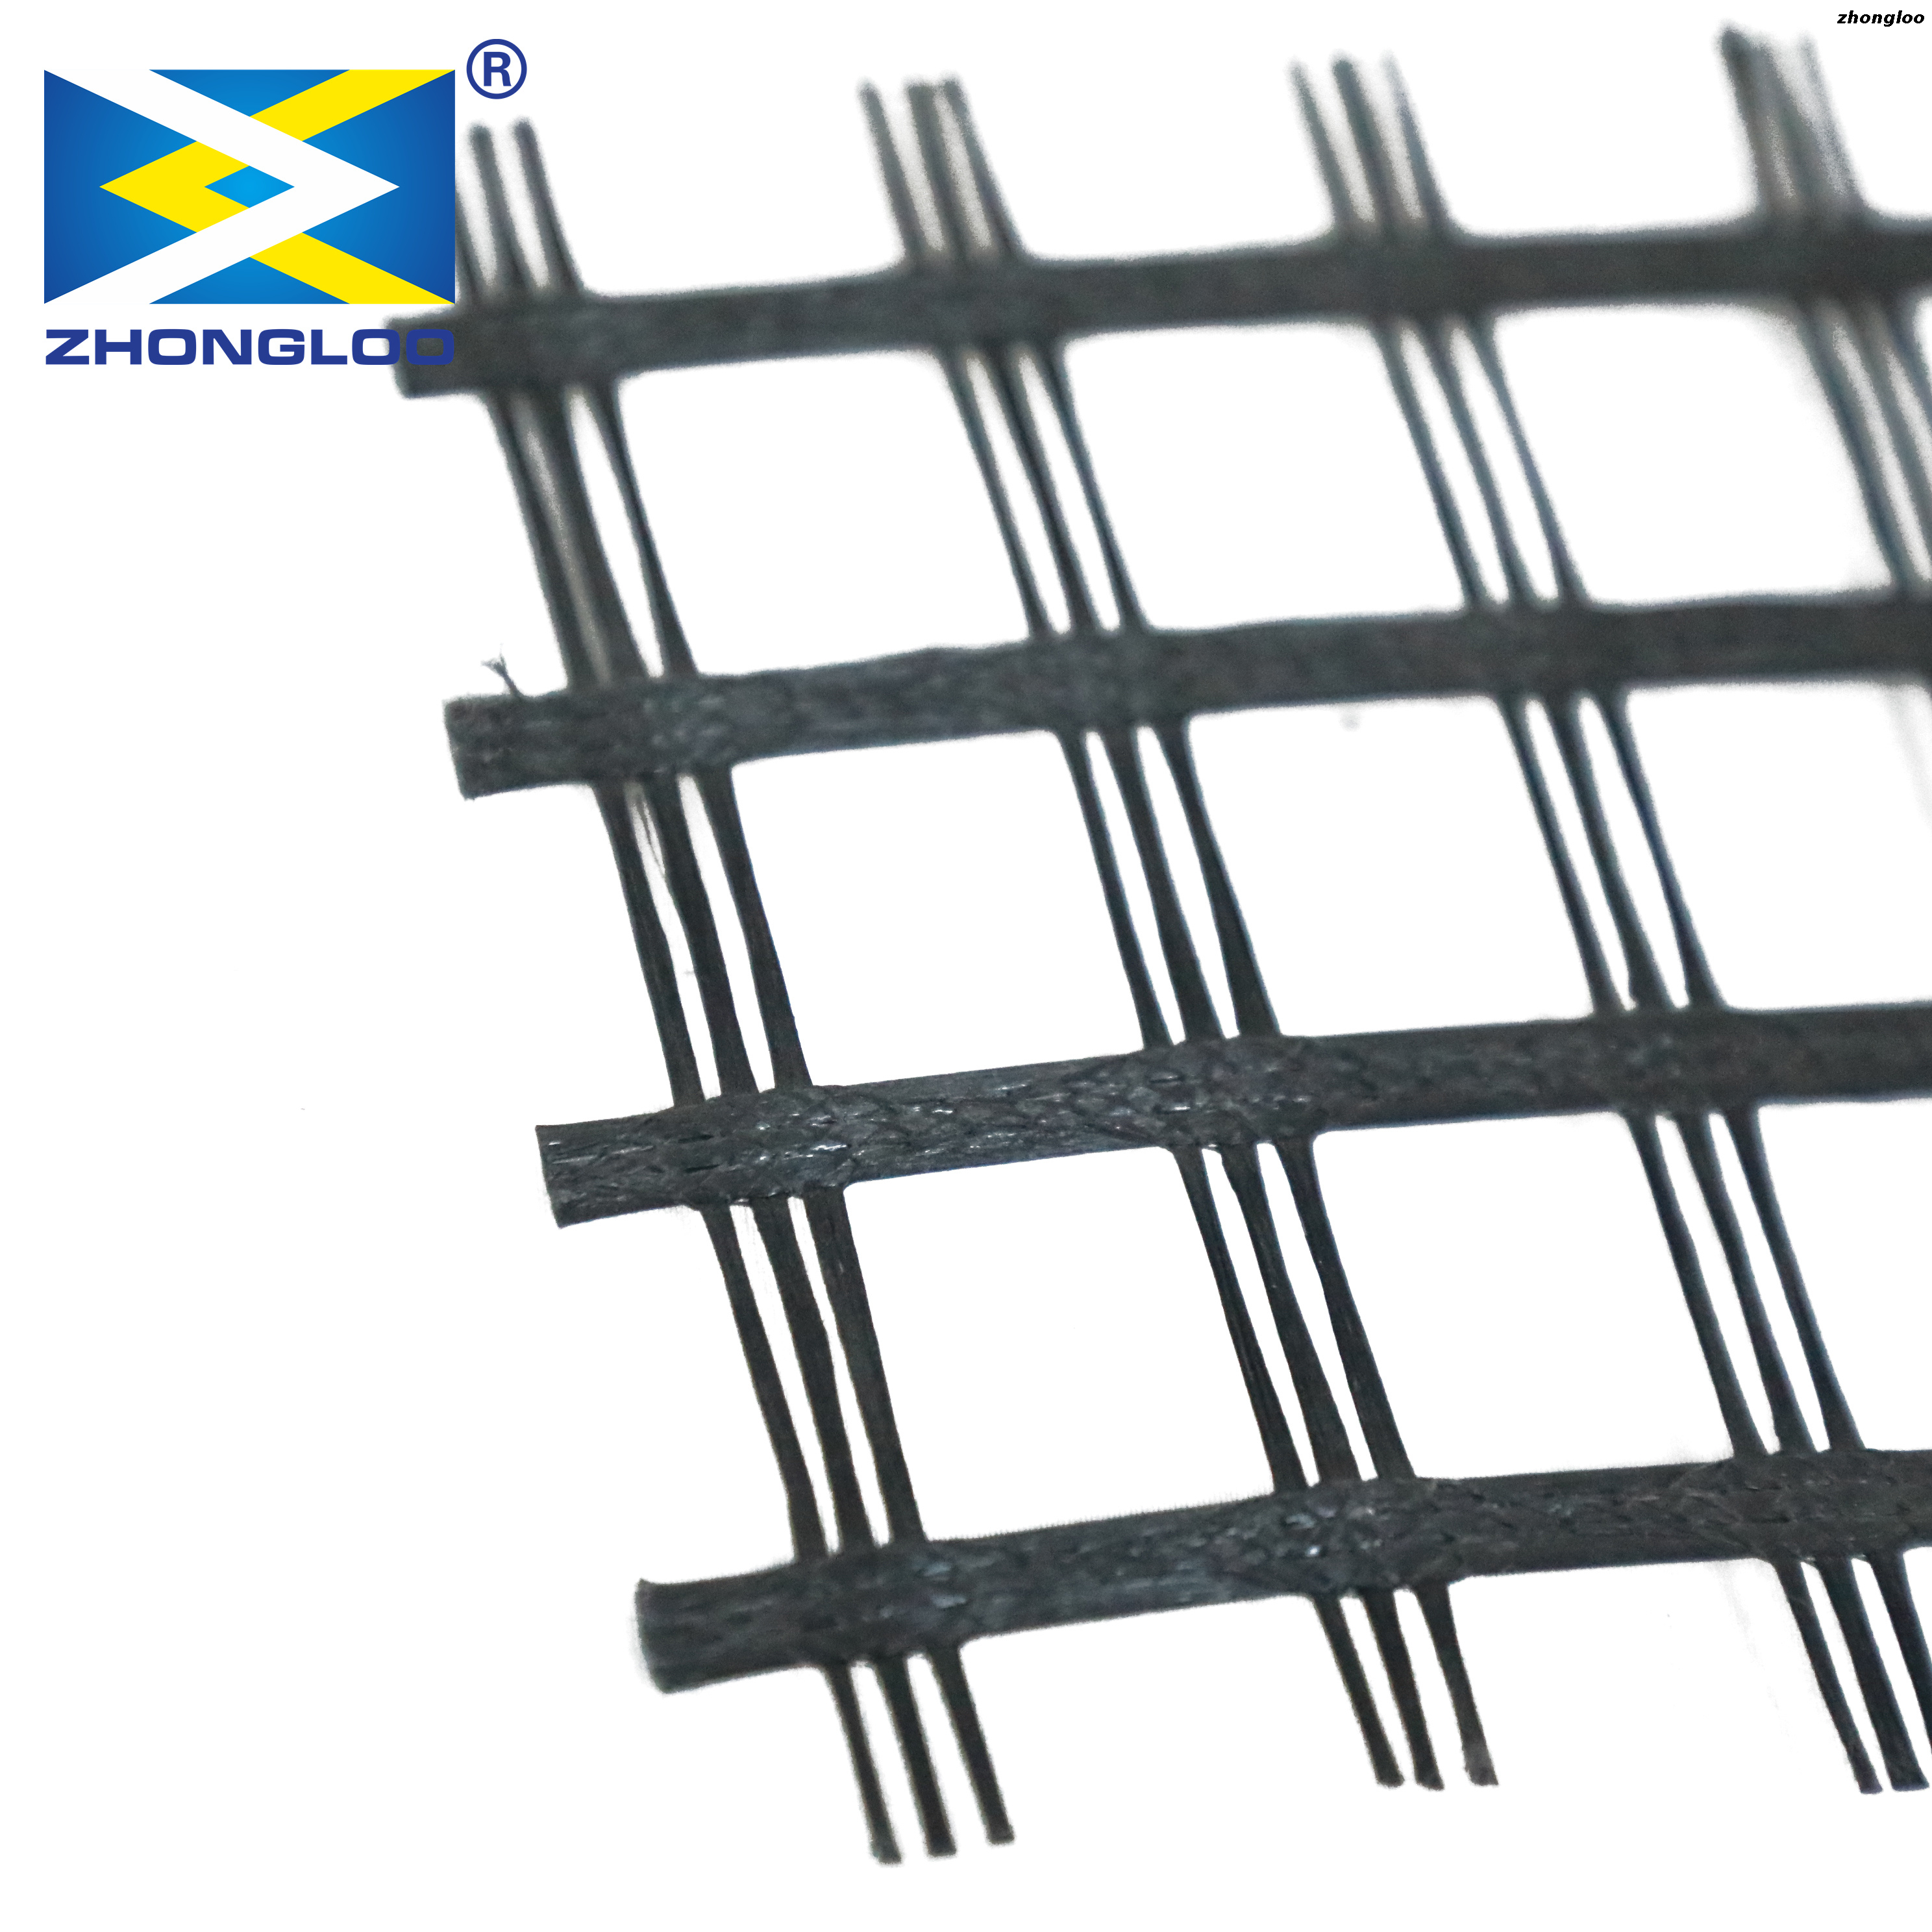 Free Sample Soil Reinforcement Fiberglass Uniaxial Geogrid for Retaining Wall